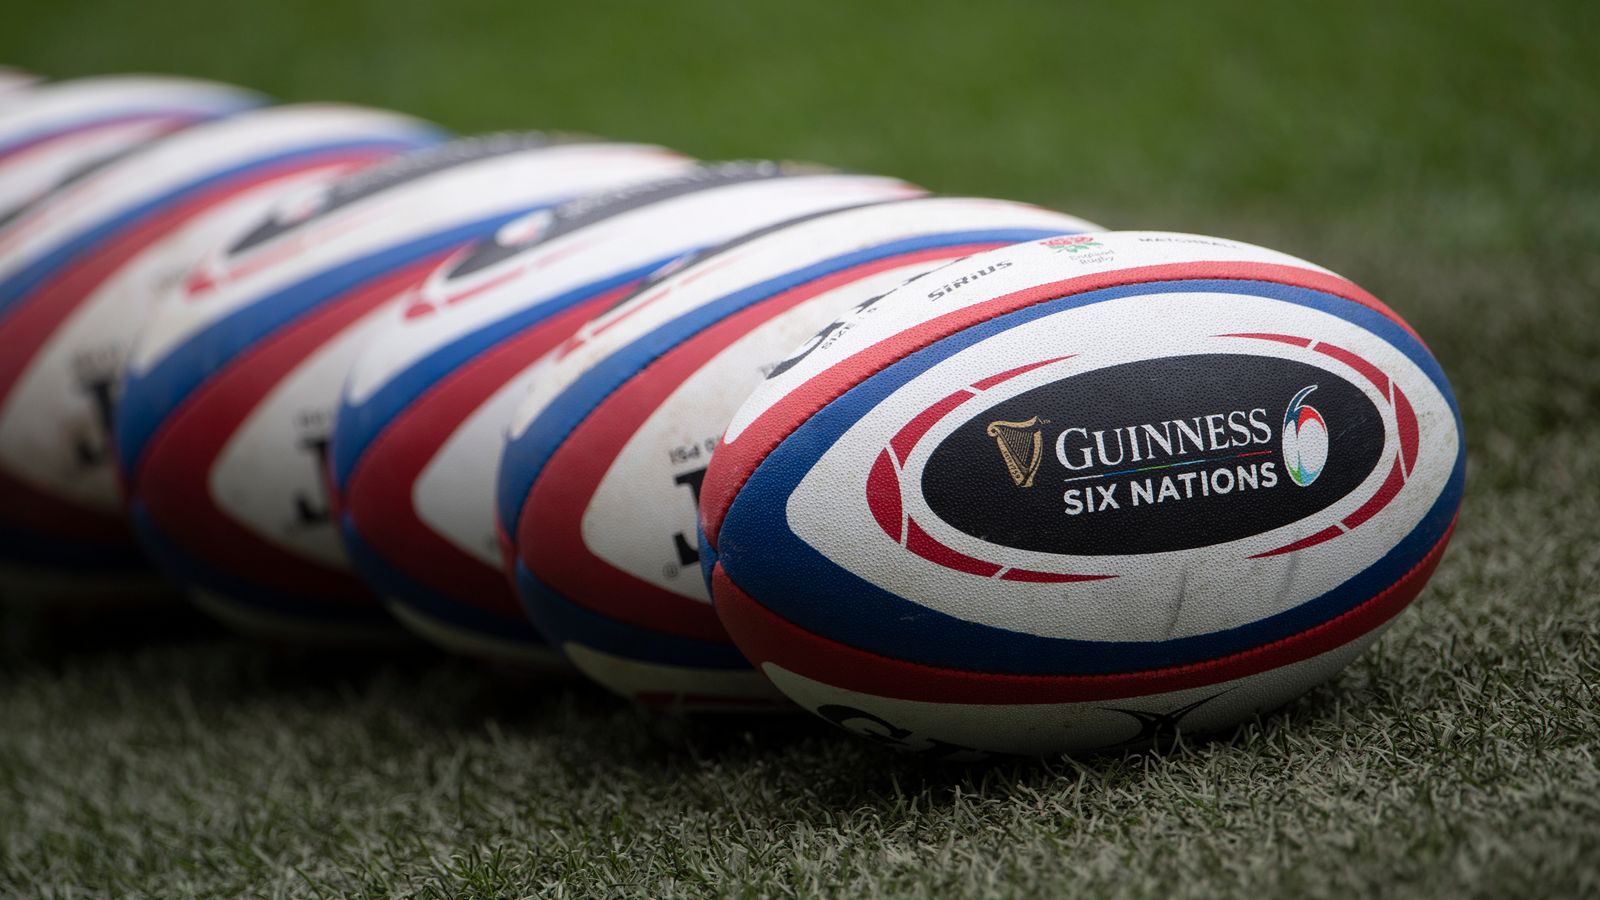 Coronavirus What next in Six Nations after fixture postponements? Rugby Union News Sky Sports